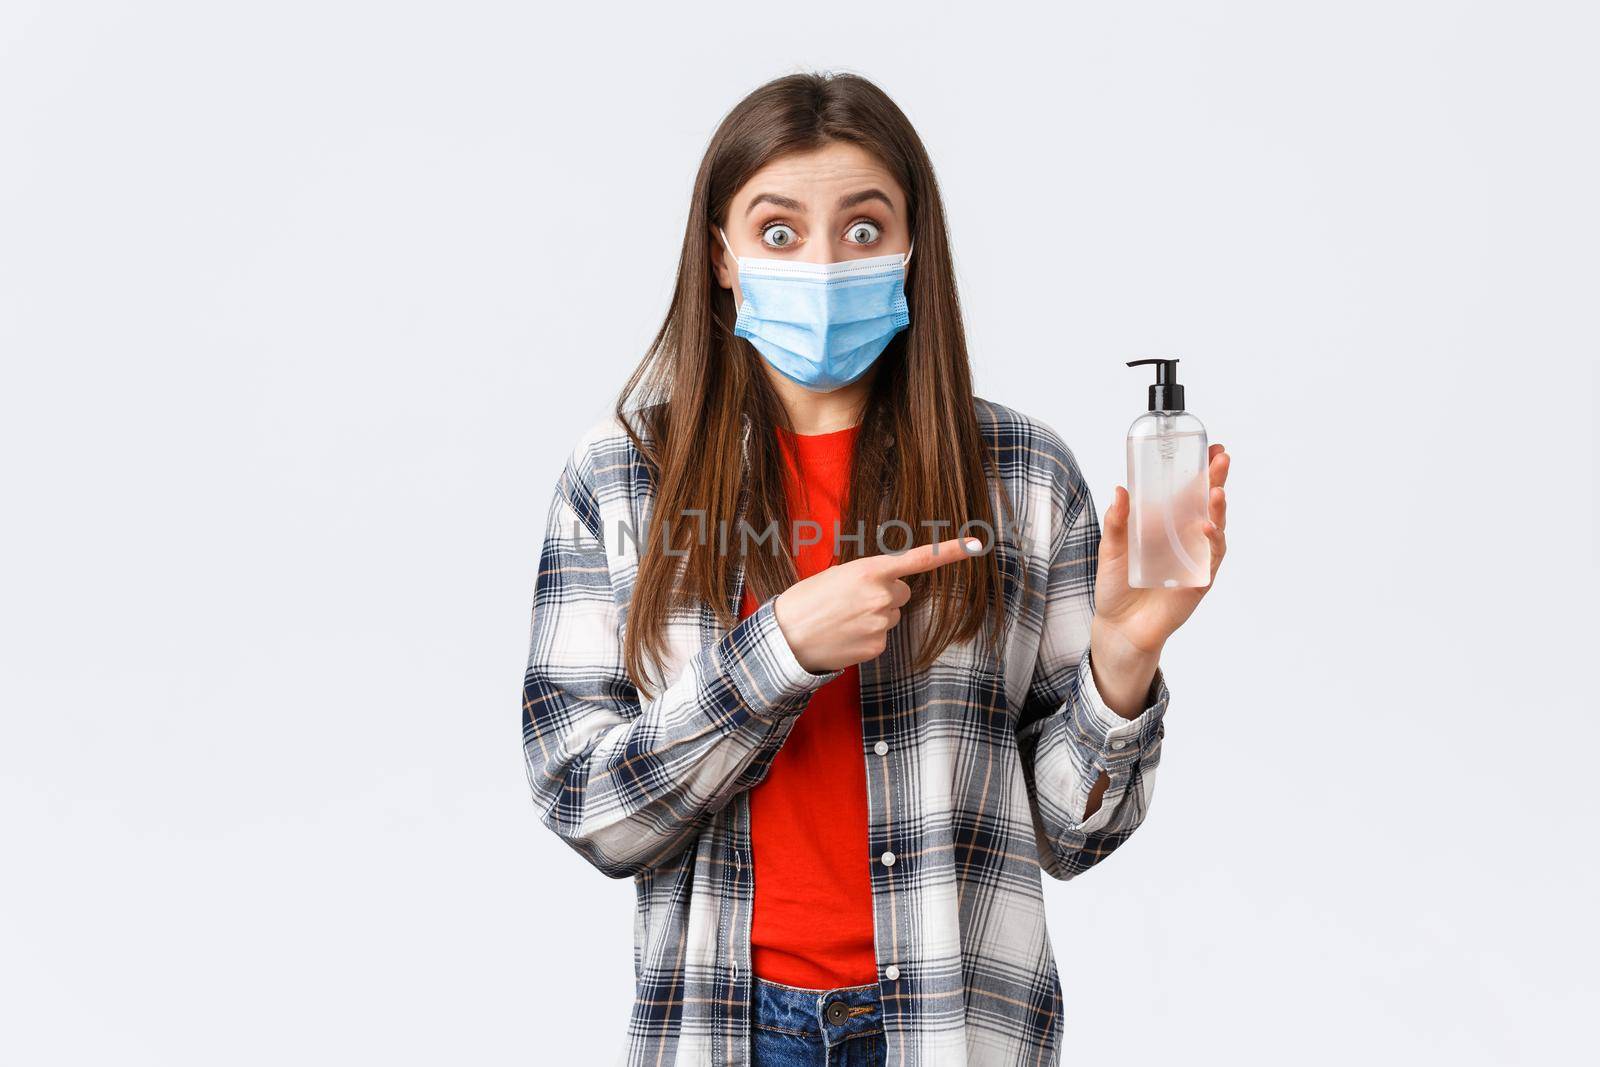 Coronavirus outbreak, leisure on quarantine, social distancing and emotions concept. Excited and astonished young woman in medical mask, pointing at hand sanitizer, recommend product by Benzoix